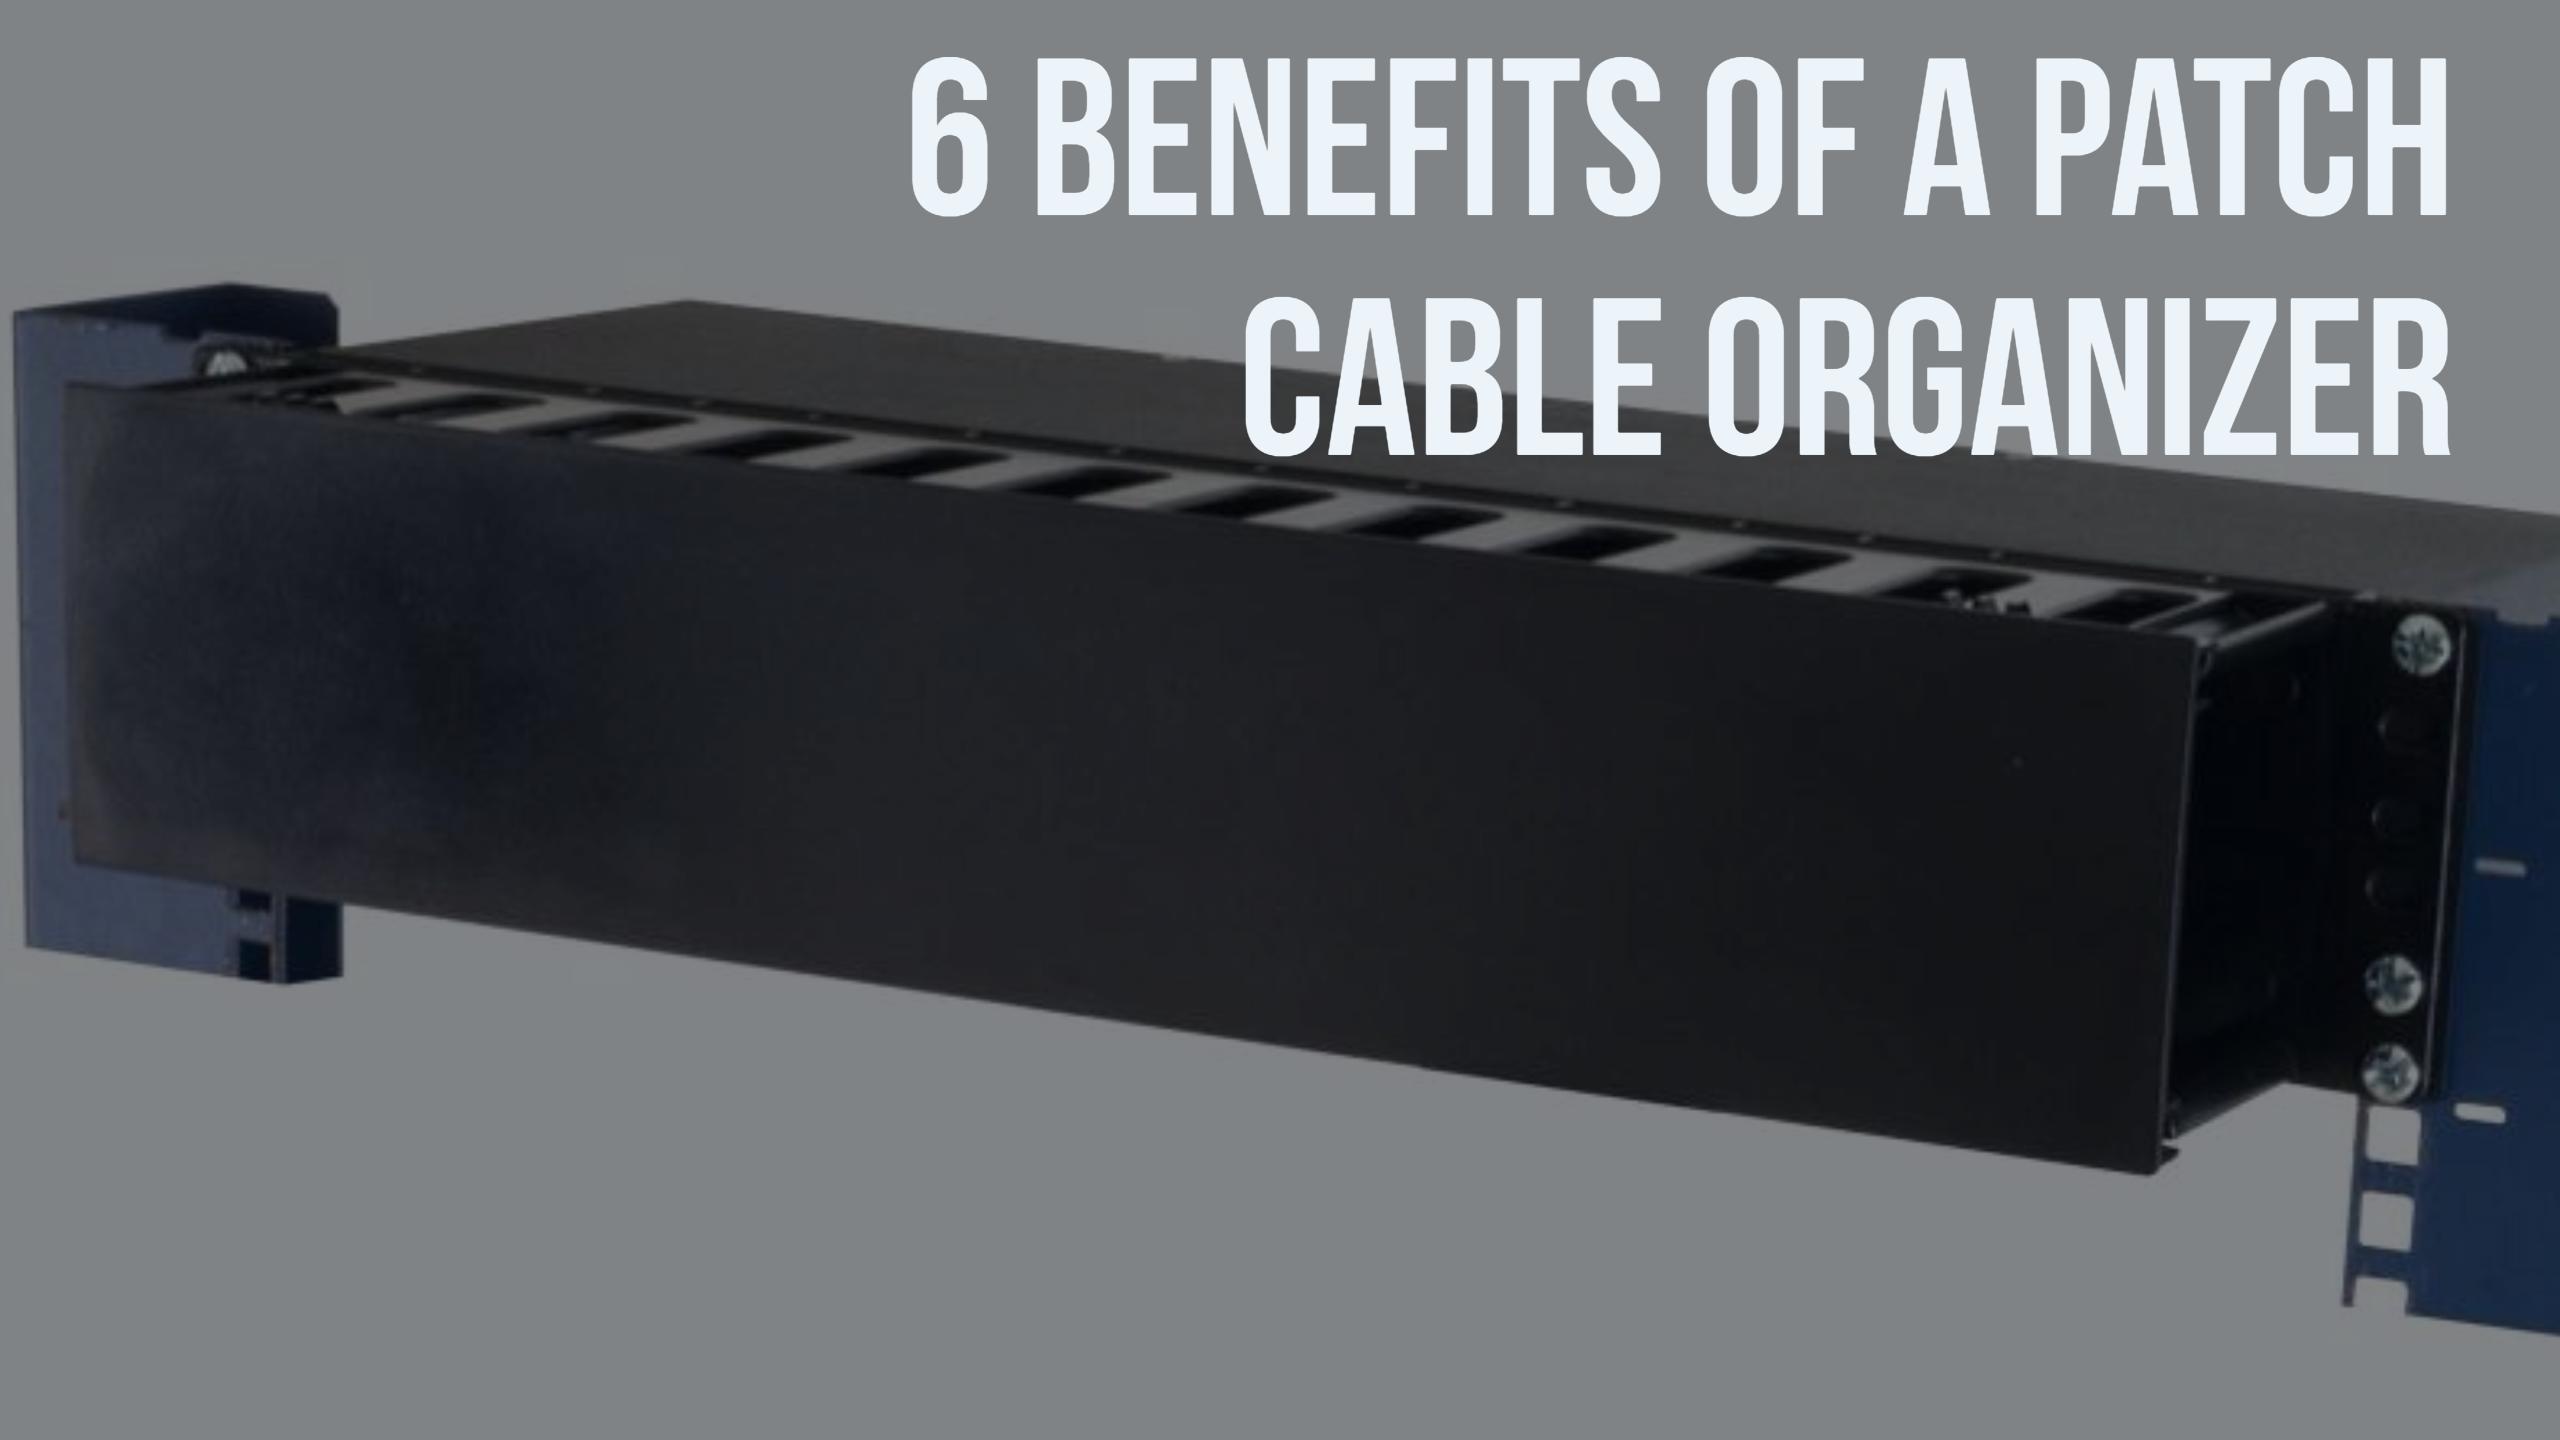 6 Benefits of a Patch Cable Organizer